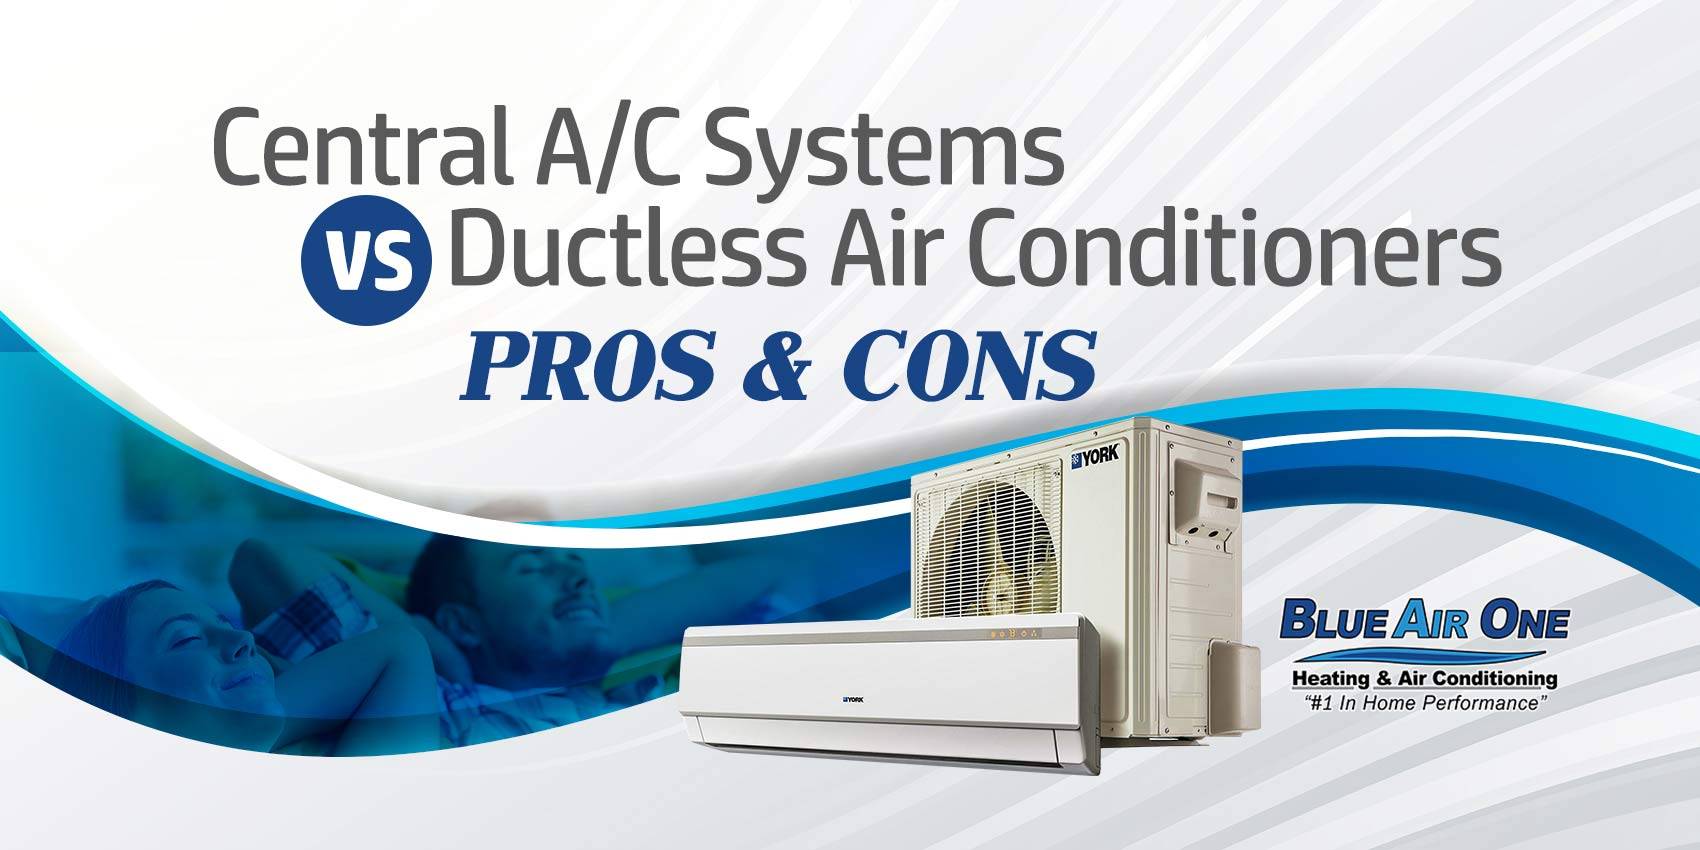 Central A/C Systems vs. Ductless Air Conditioners: Pros and Cons